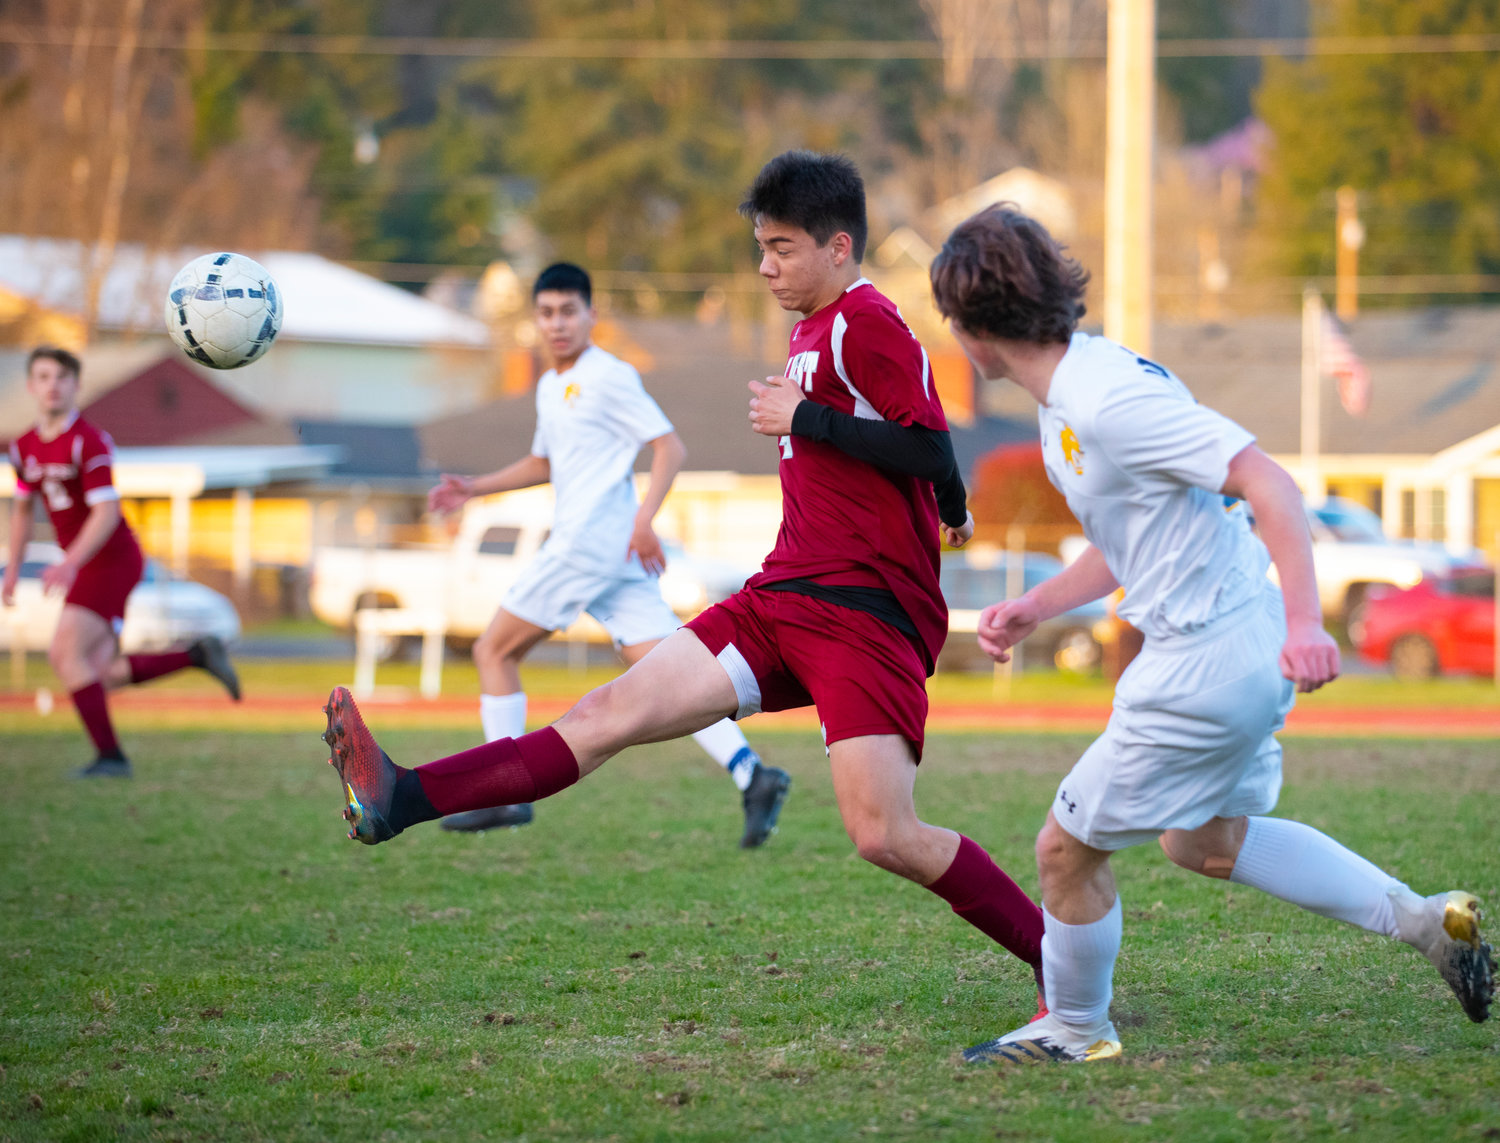 A W.F. West player boots the ball away from Aberdeen on Tuesday in Chehalis.